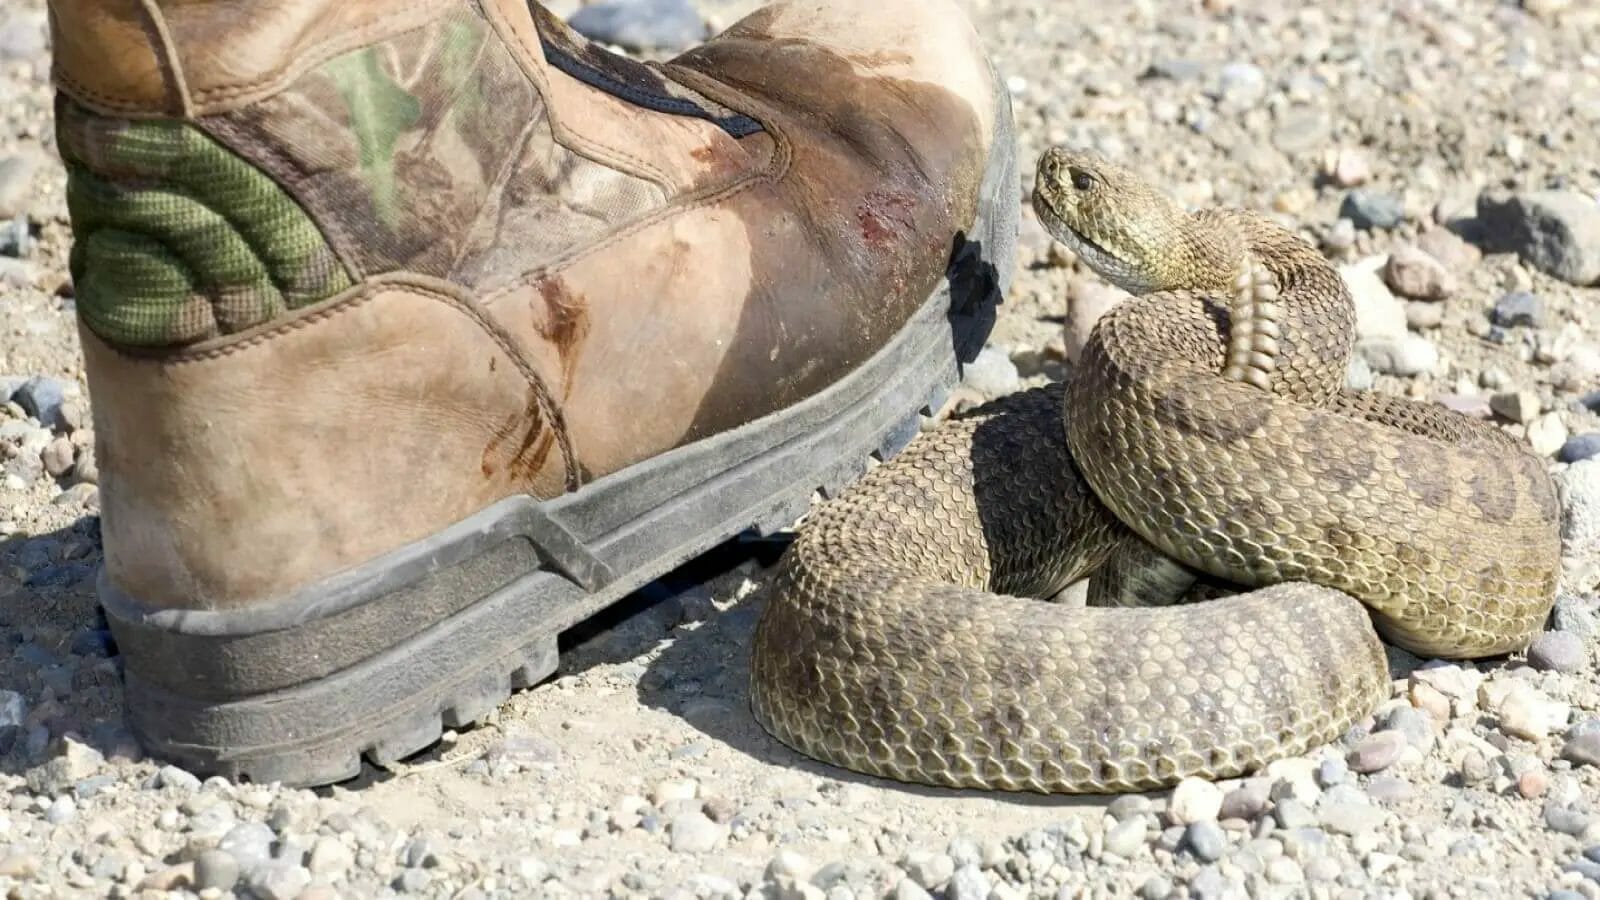 Stock photo, closeup of a boot about to step on a live rattlesnake outdoors.